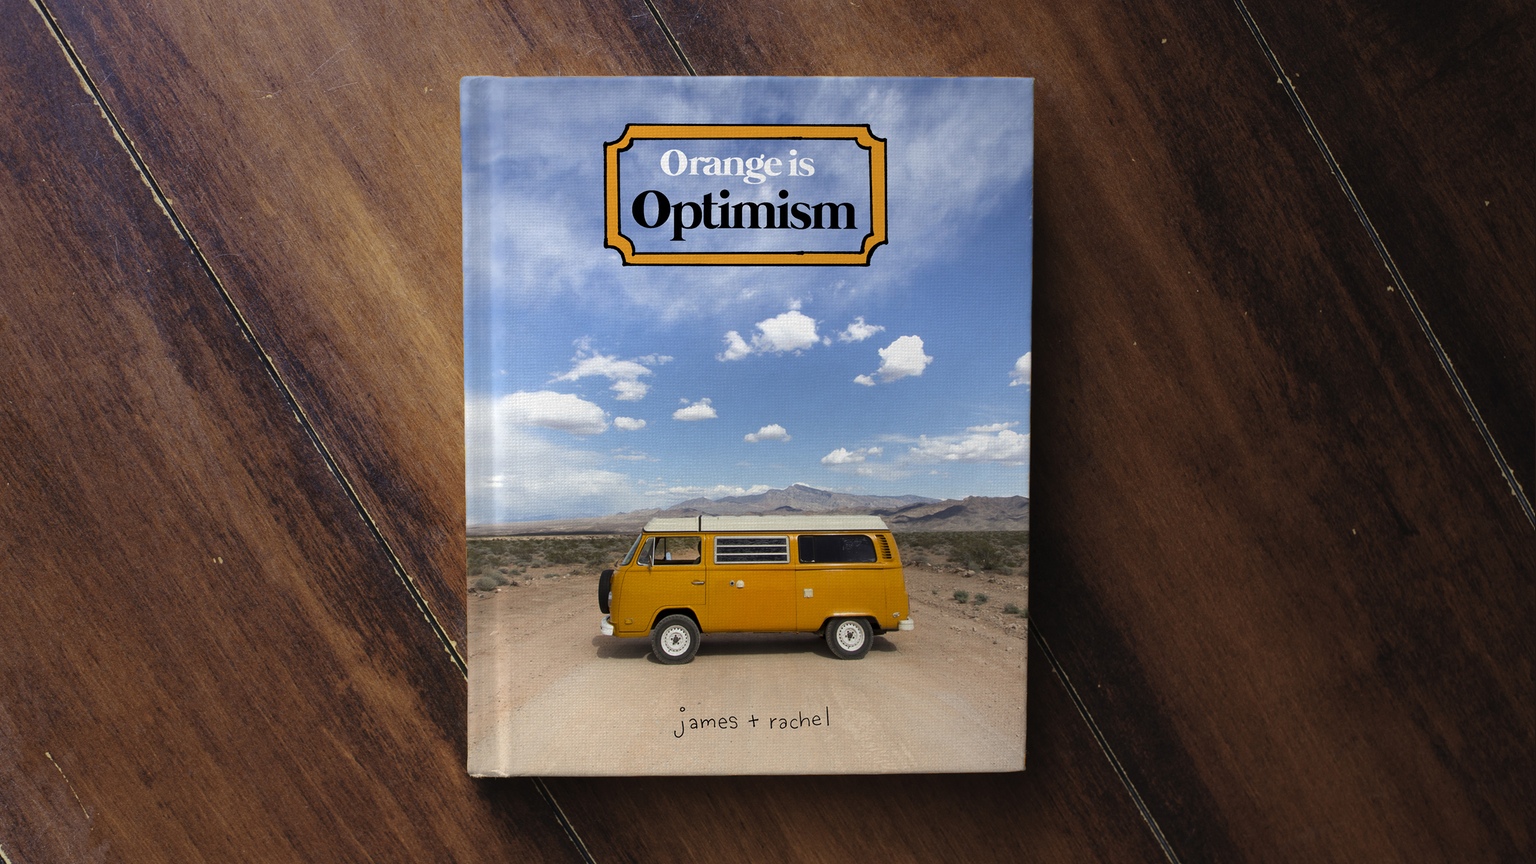 Orange is Optimism, a book by Idle Theory Bus